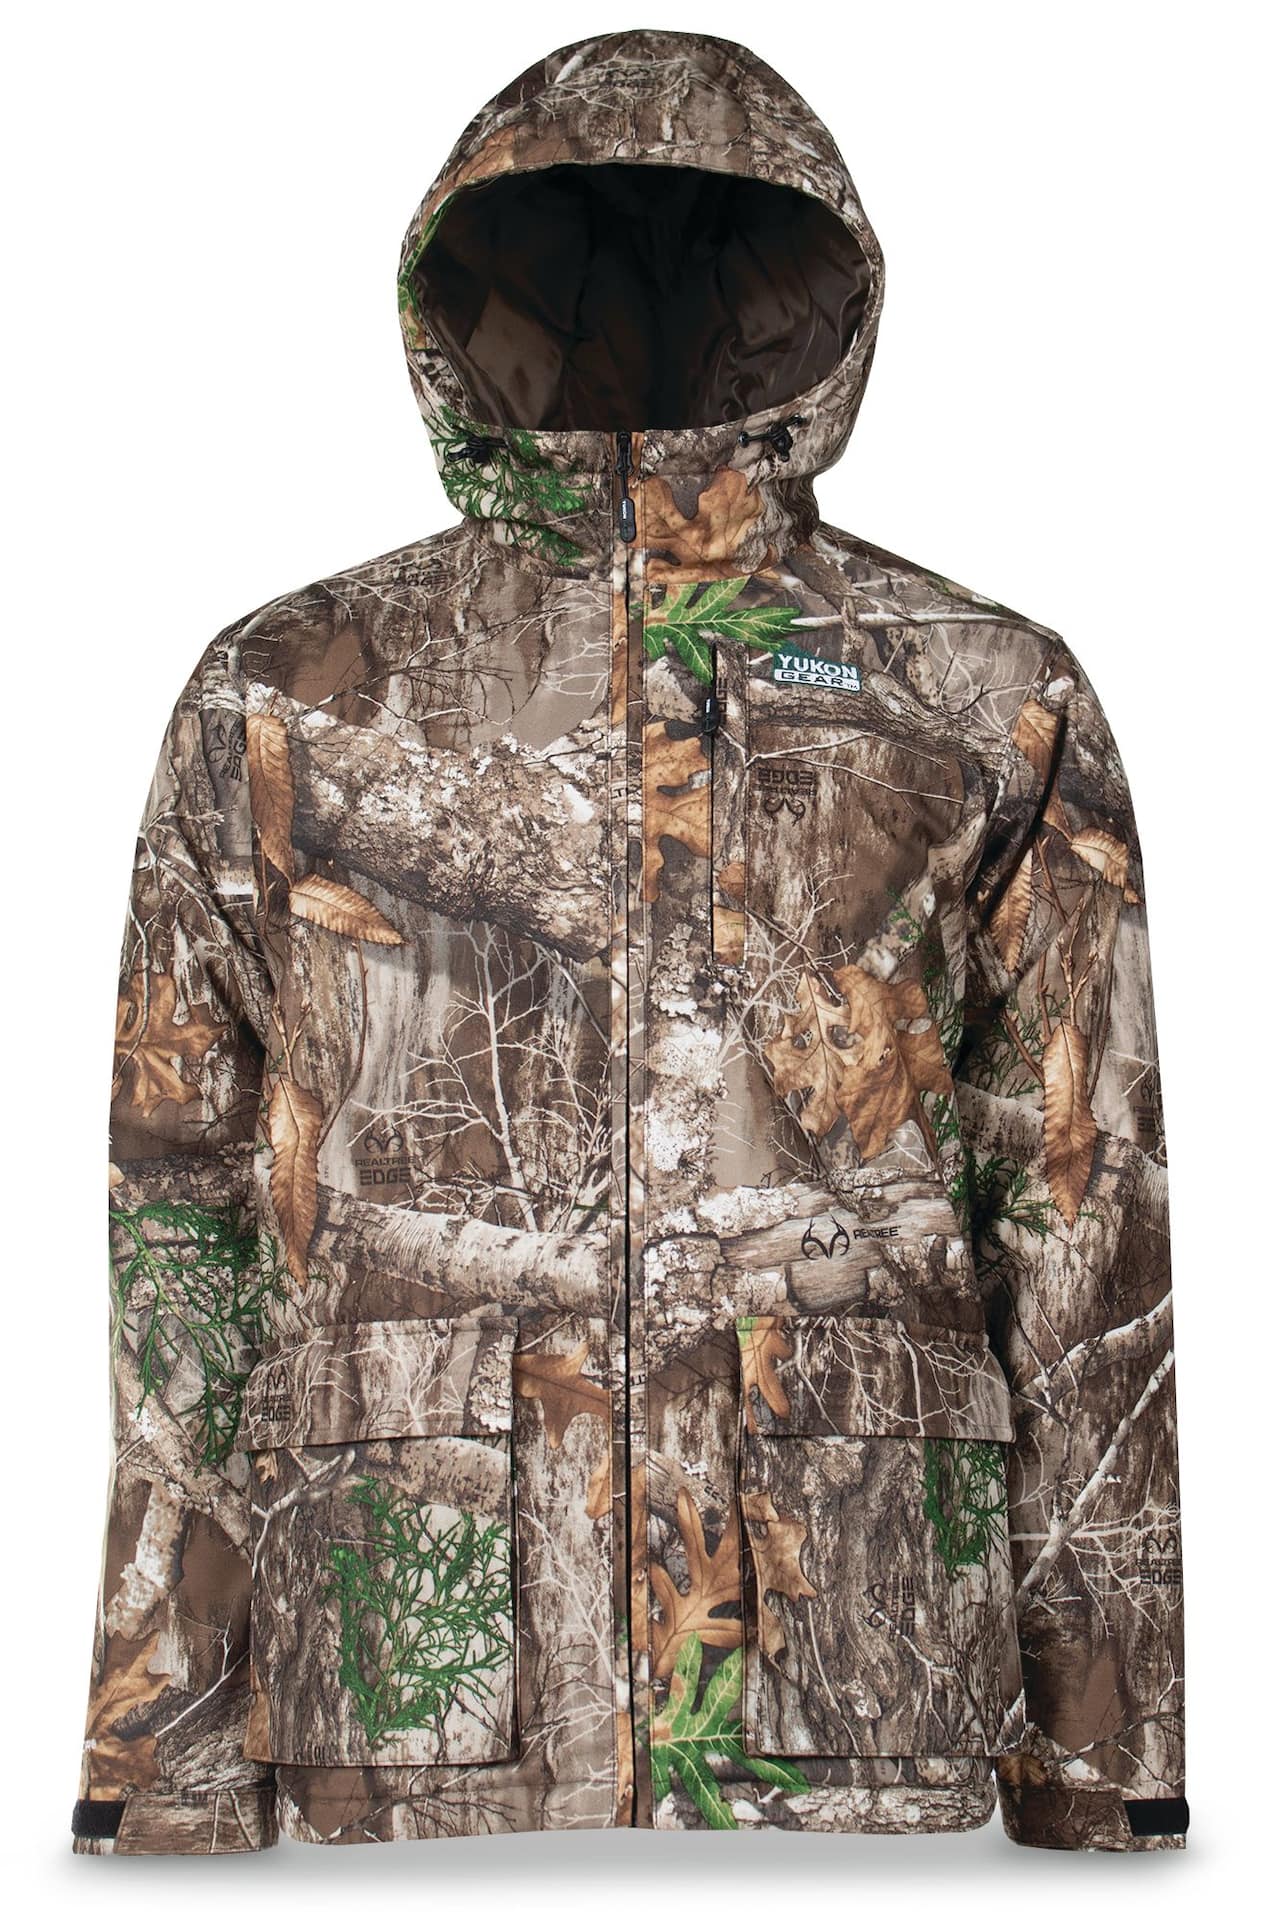 Yukon Gear Men's Insulated Water-Resistant Windproof Hunting Jacket with  Cargo Hand Pockets, Realtree Edge Camo